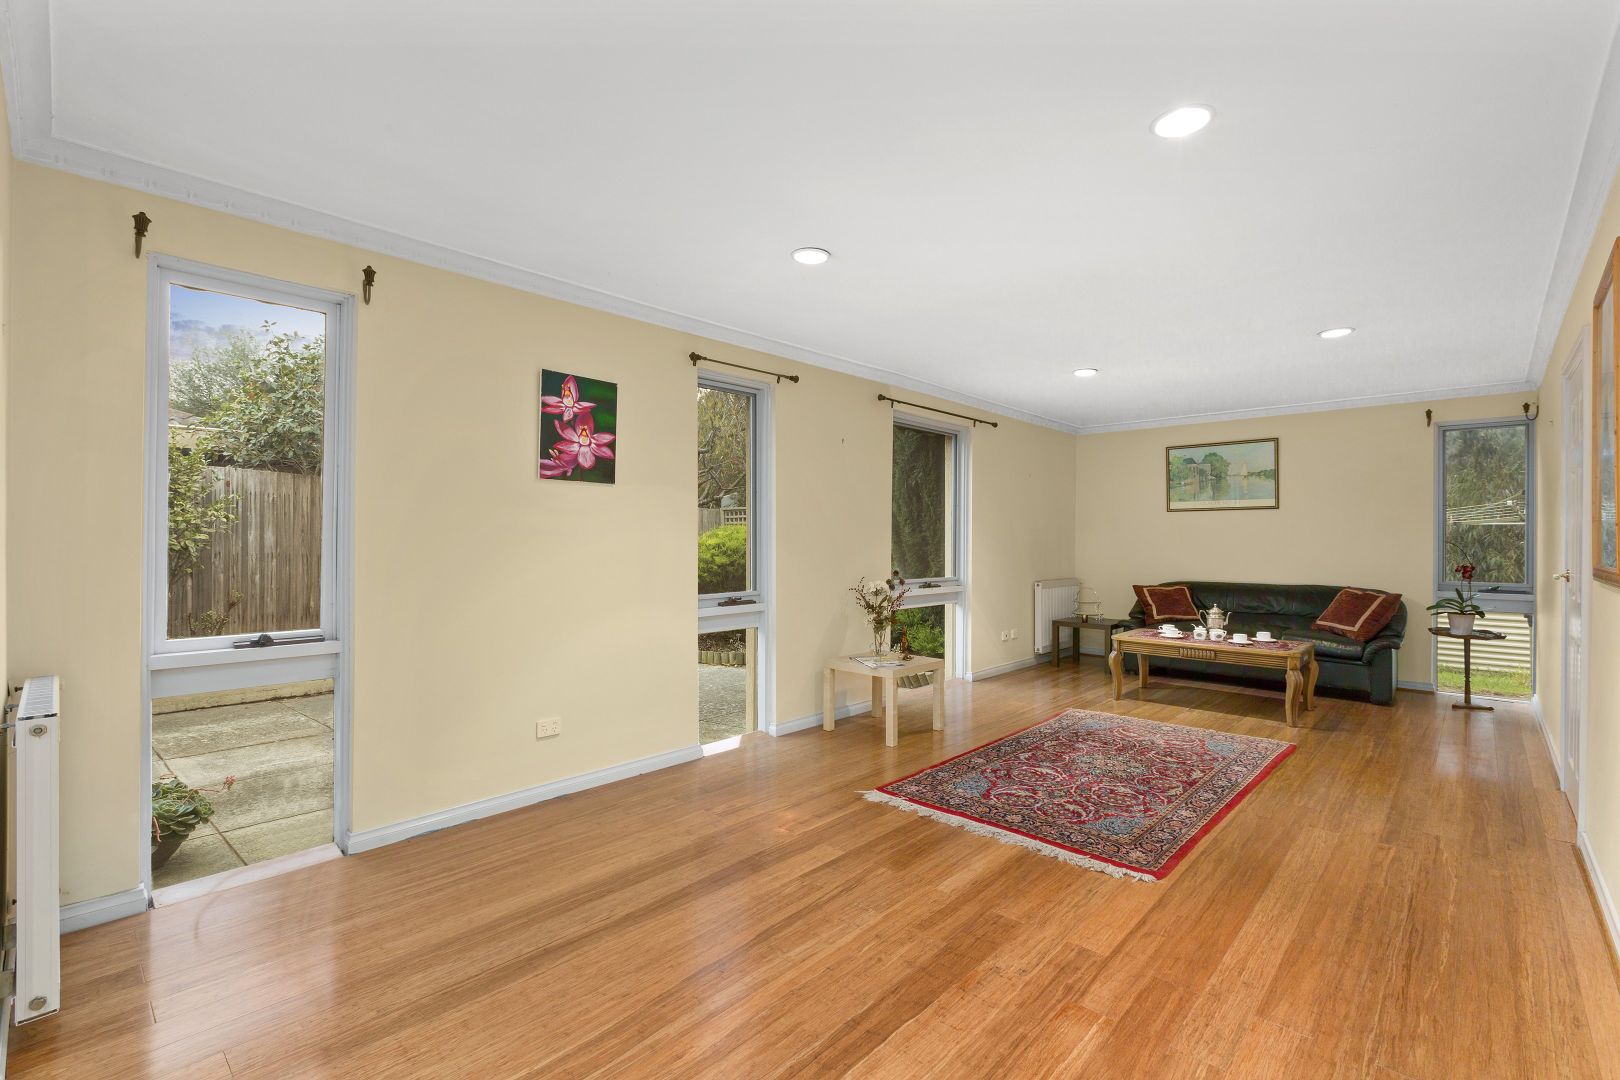 14 Montpellier Crescent, Templestowe Lower VIC 3107, Image 2